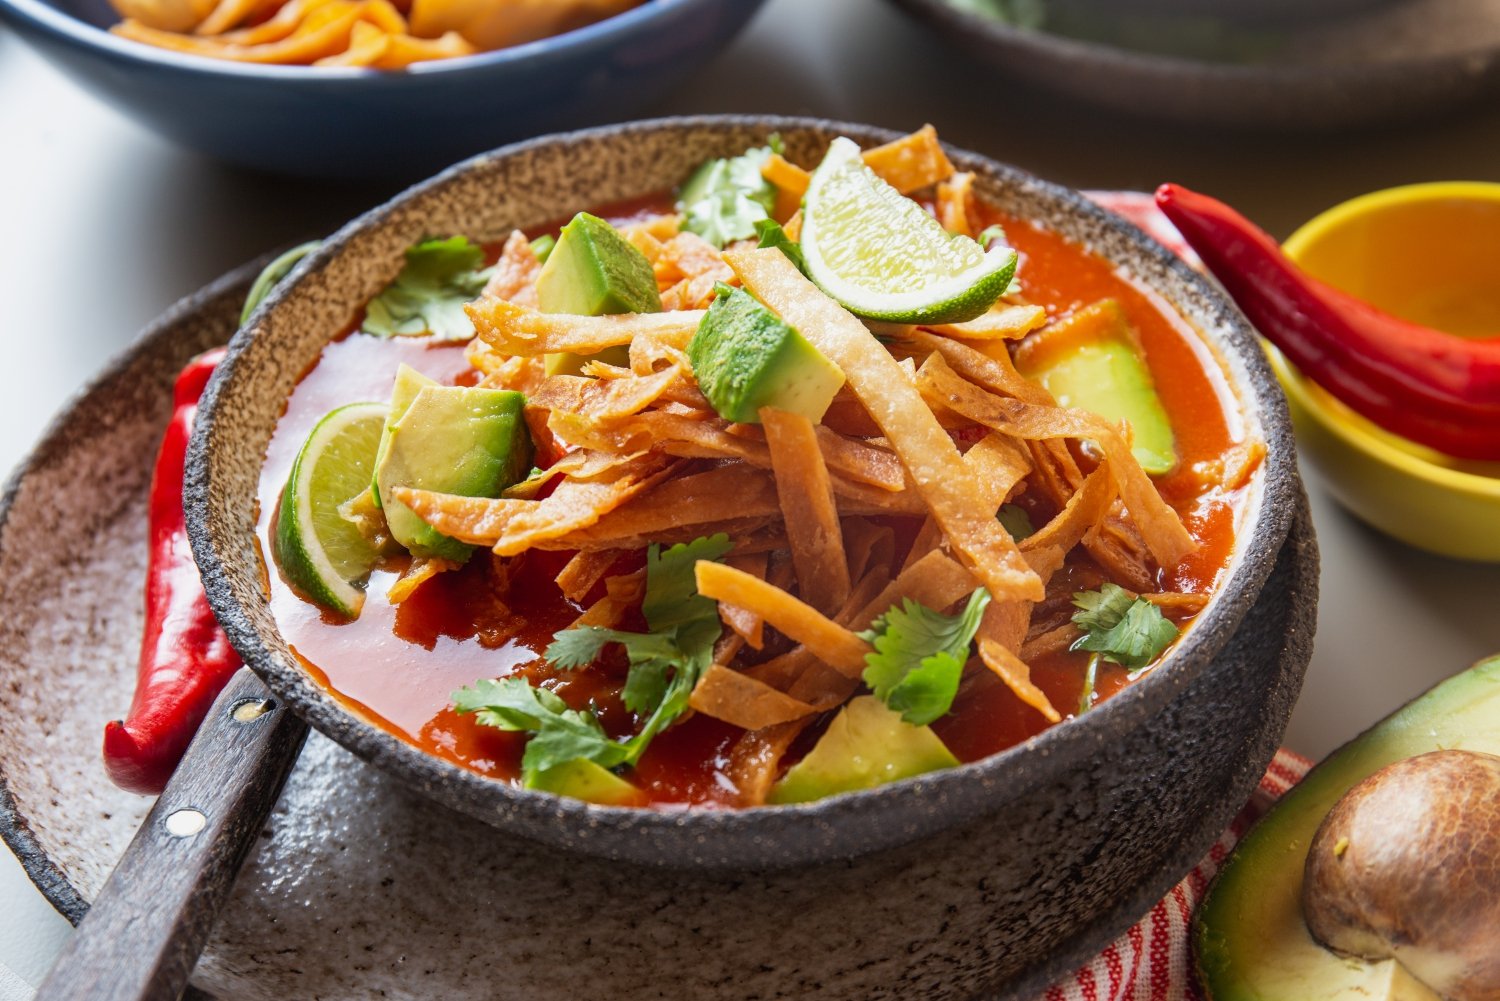 History of the pozole and the Aztec soup